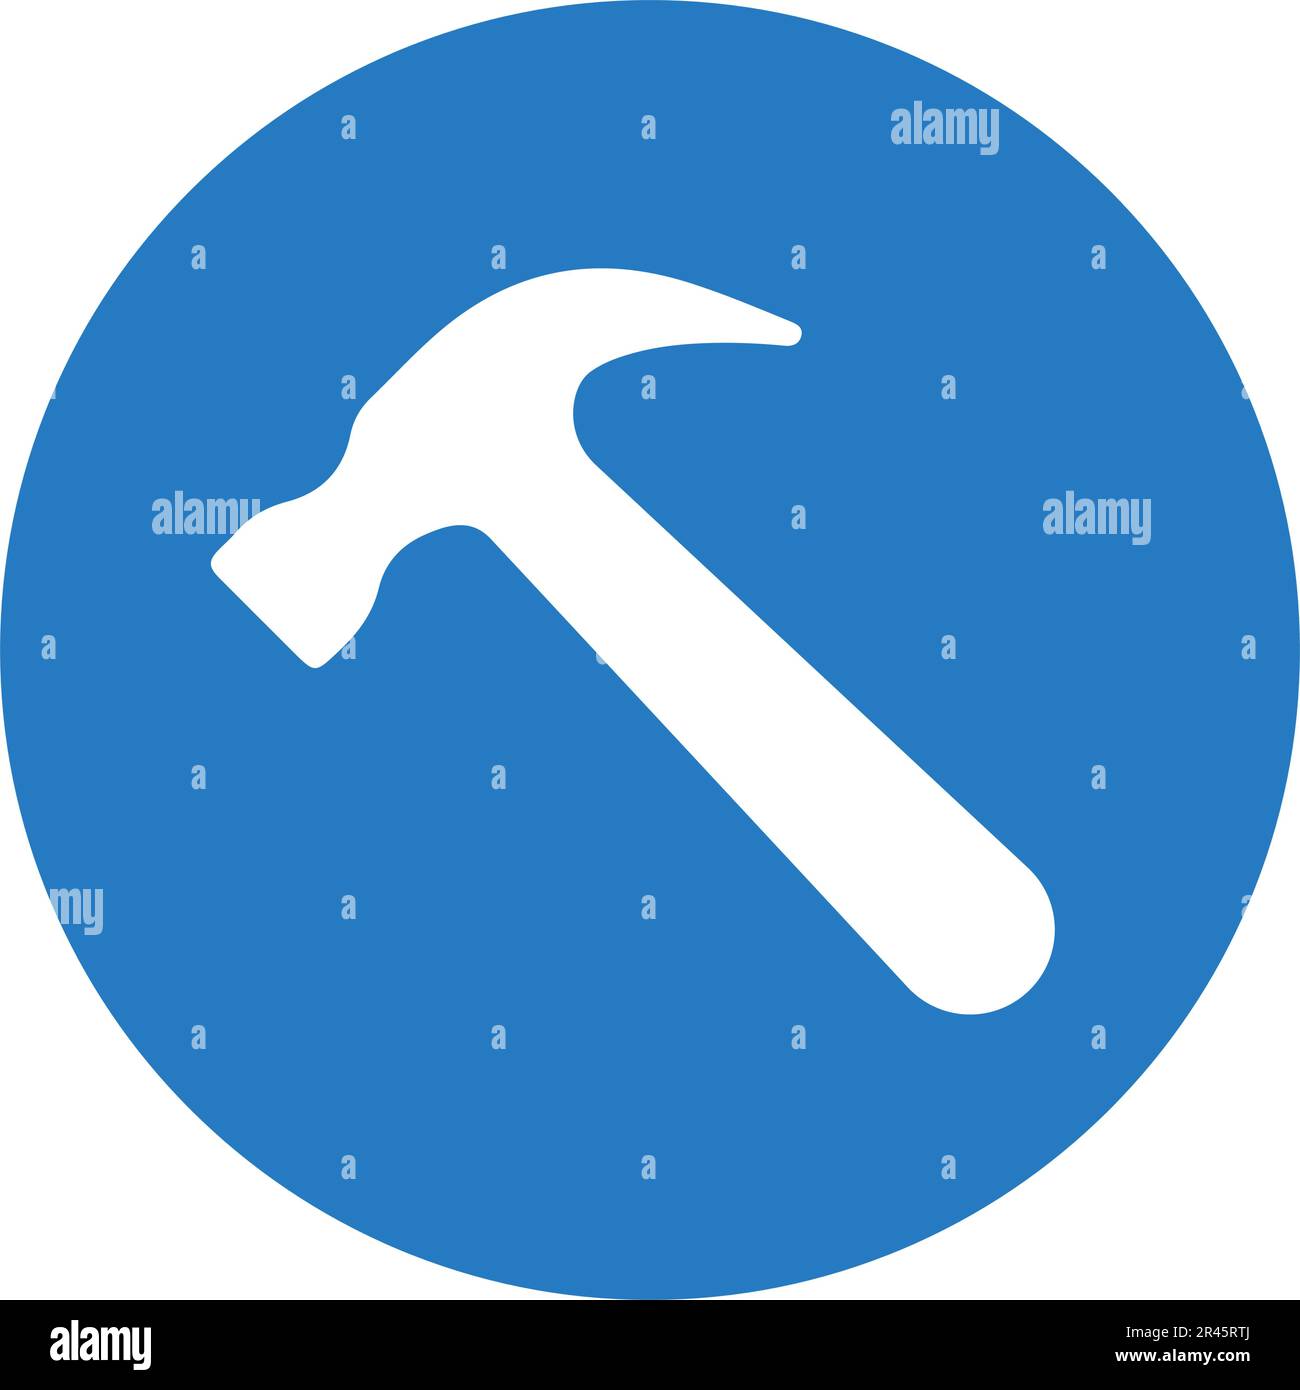 Hammer, repair, tools icon. Use for designing and developing websites, commercial purposes, print media, web or any type of design task. Stock Vector